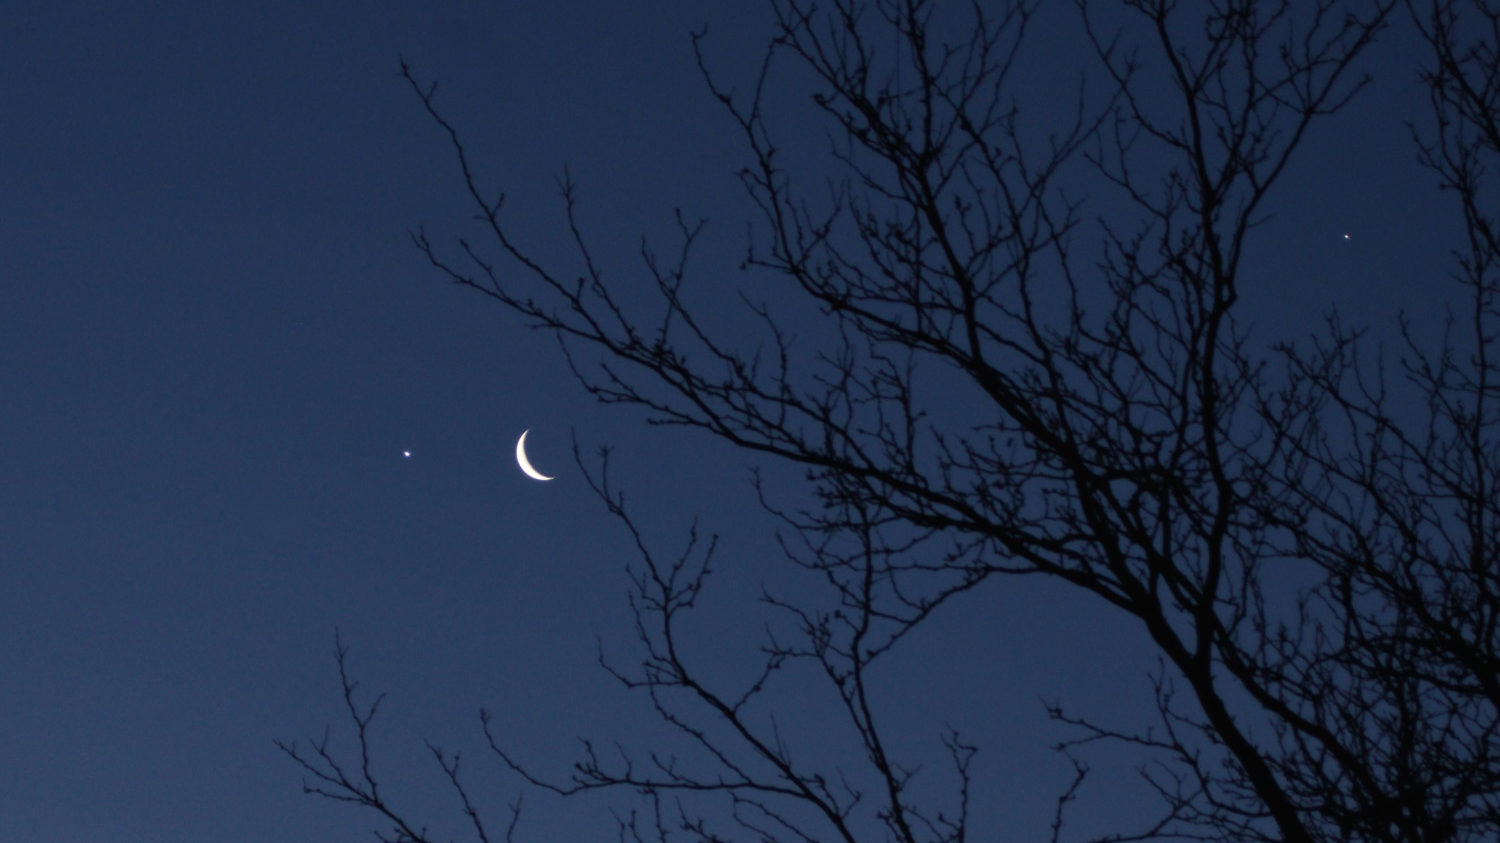 Venus, the waning crescent moon, and Jupiter appear together in the night sky.